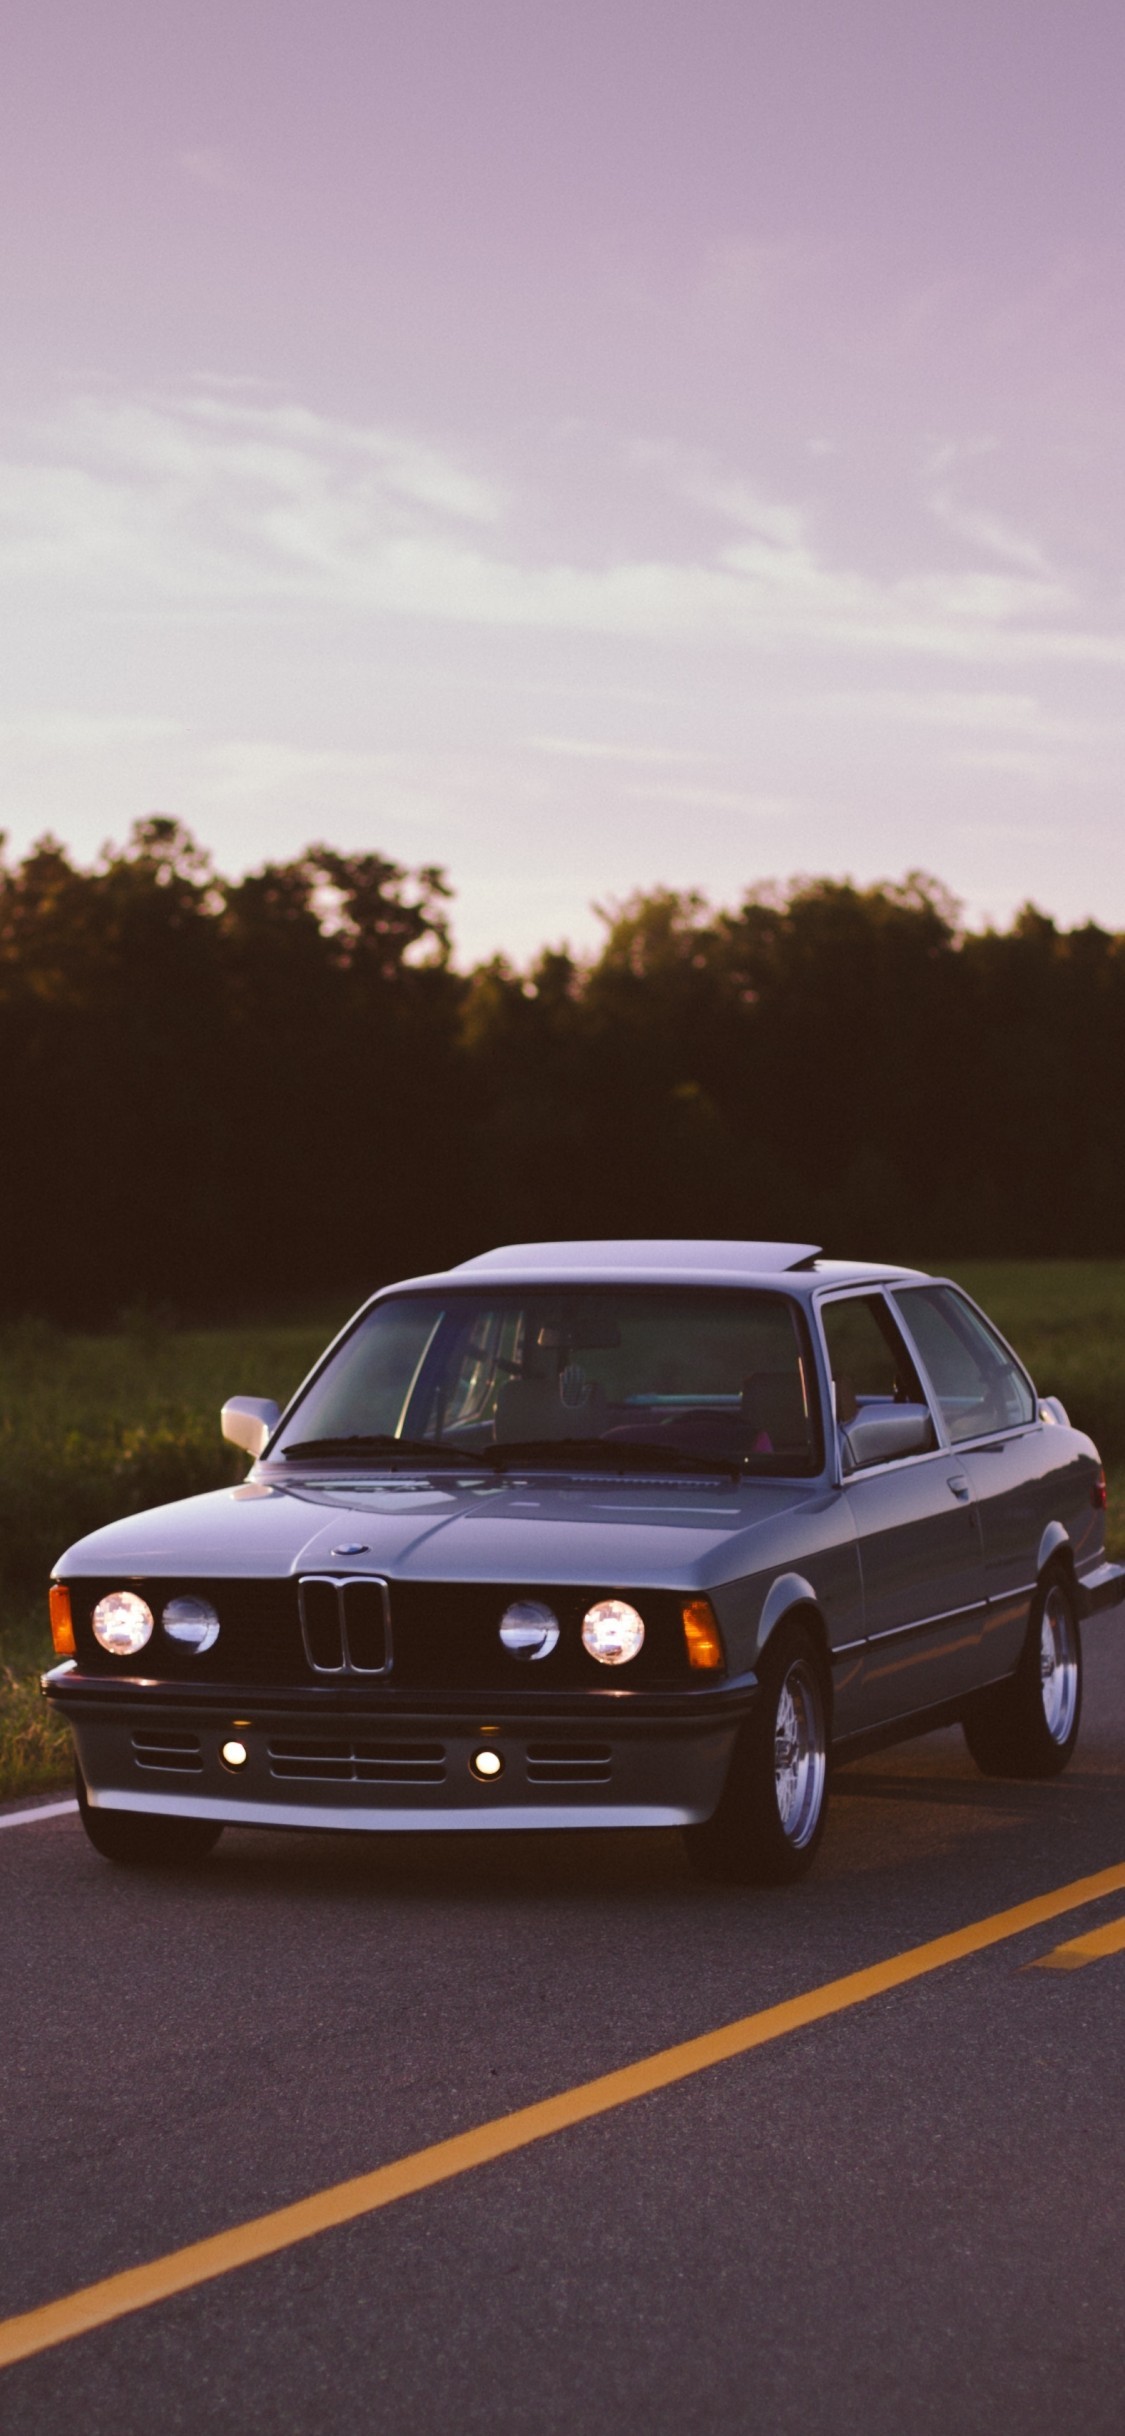 Bmw, Old Cars, Trees, Evening - Vintage Bmw Wallpaper Iphone X - HD Wallpaper 